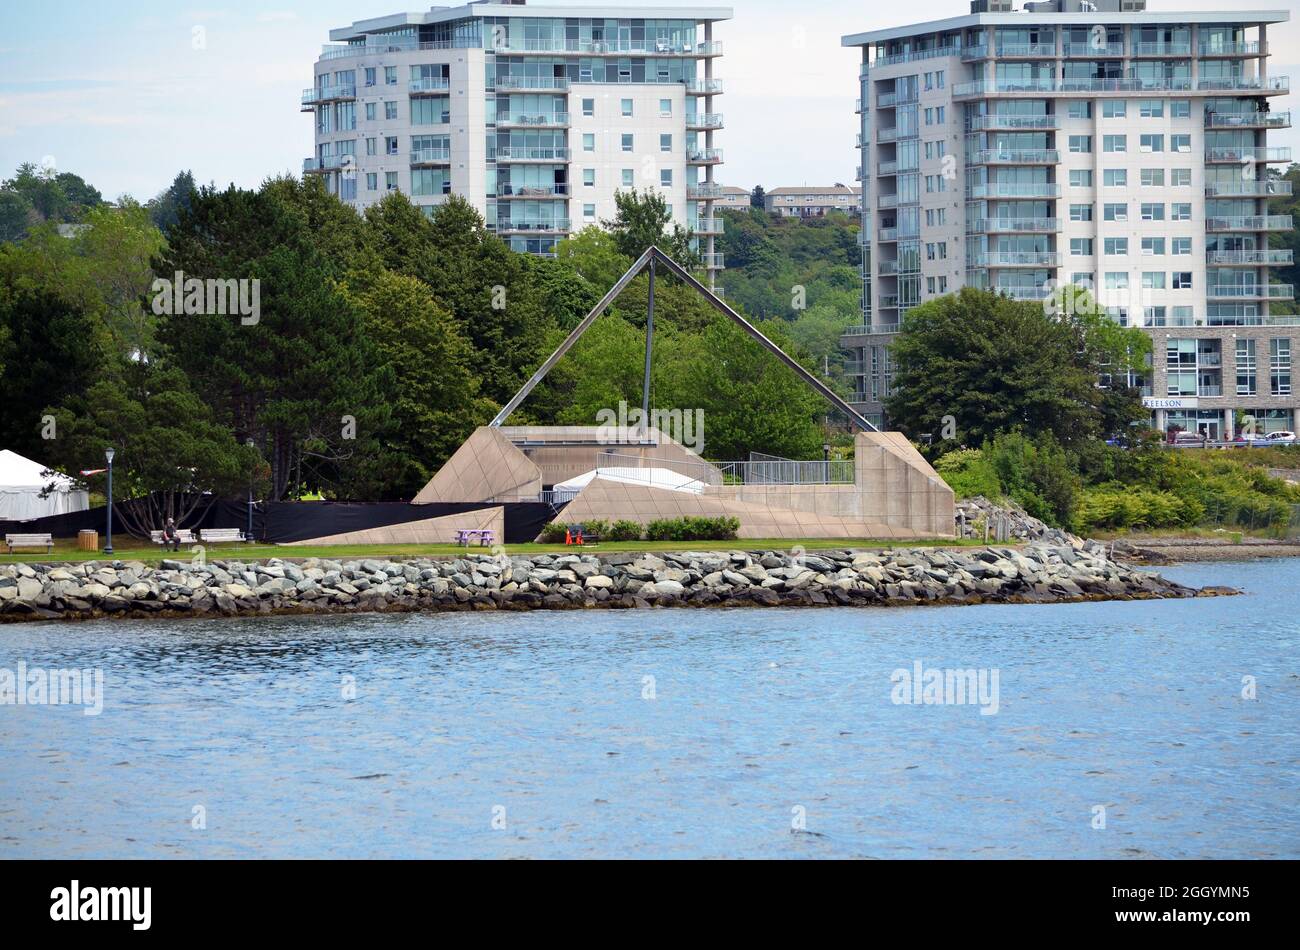 The World Peace Pavilion in on the waterfront of Dartmouth, Nova Scotia, Canada Stock Photo